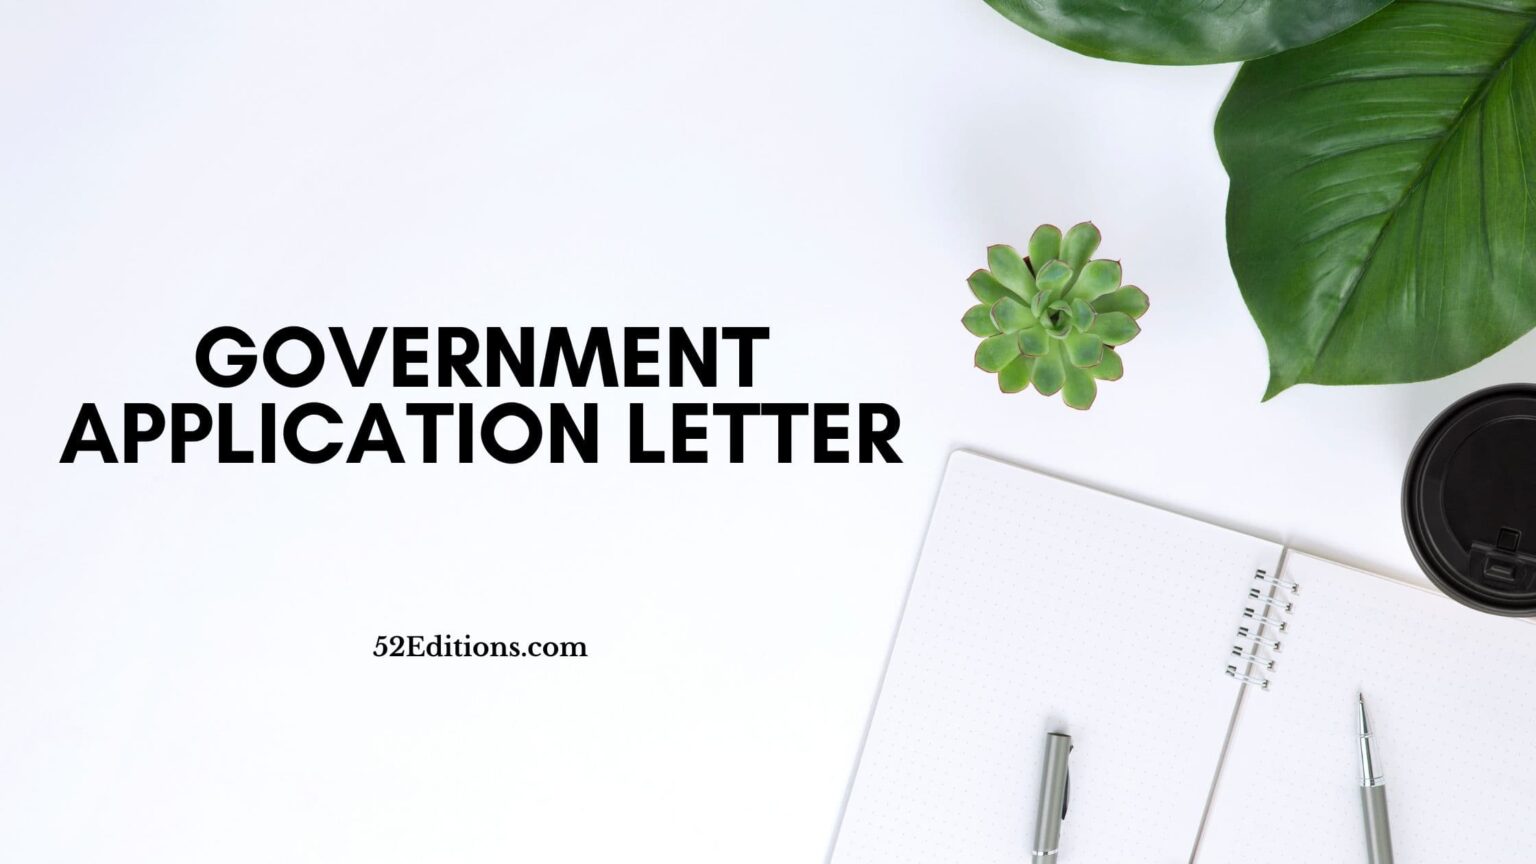 example application letter for government